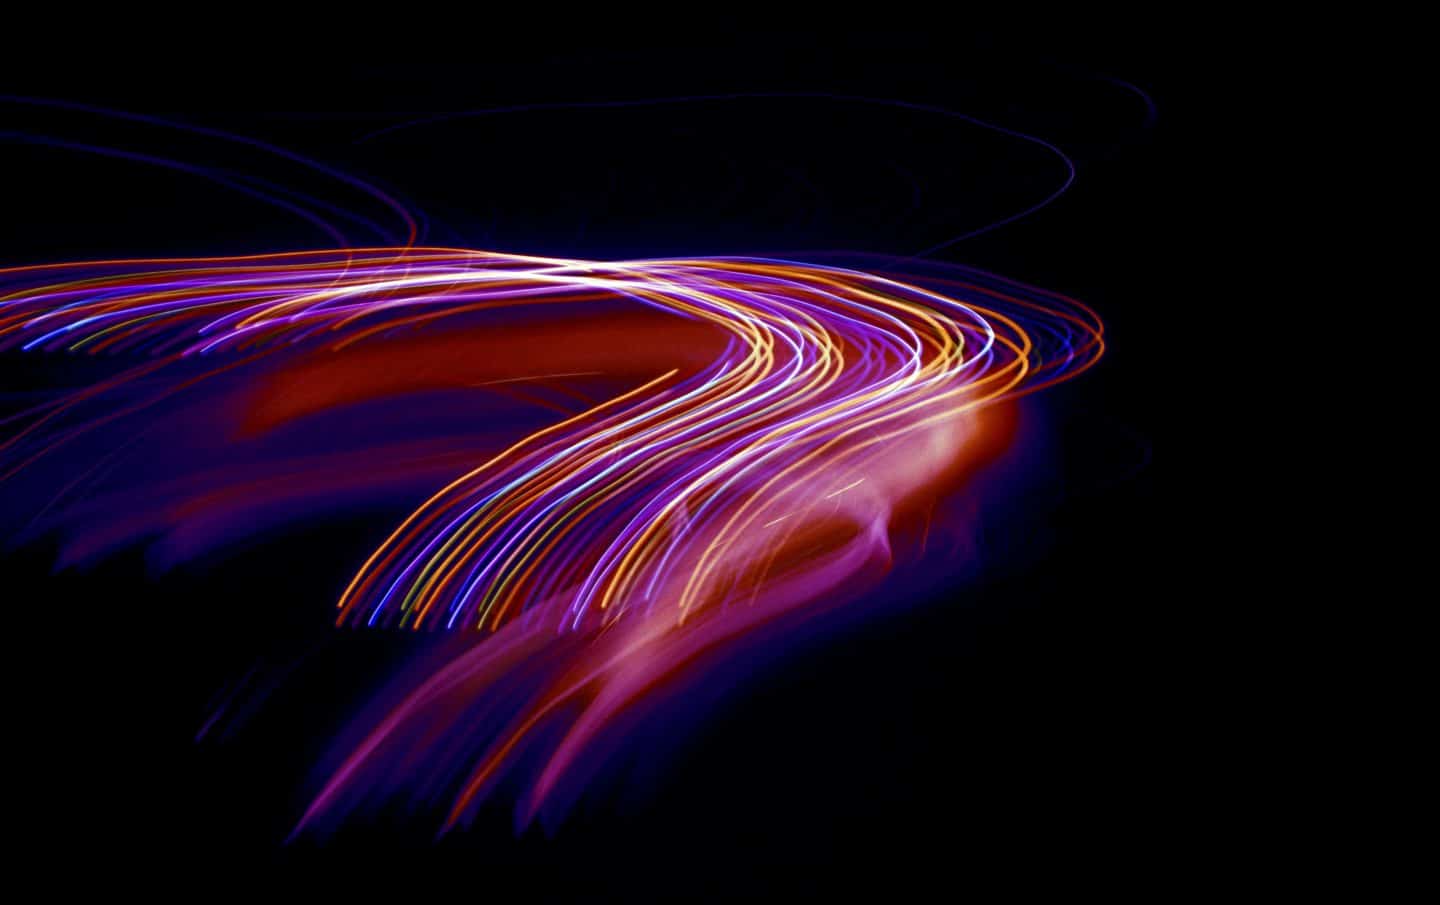 A_Light_painting_curve_move